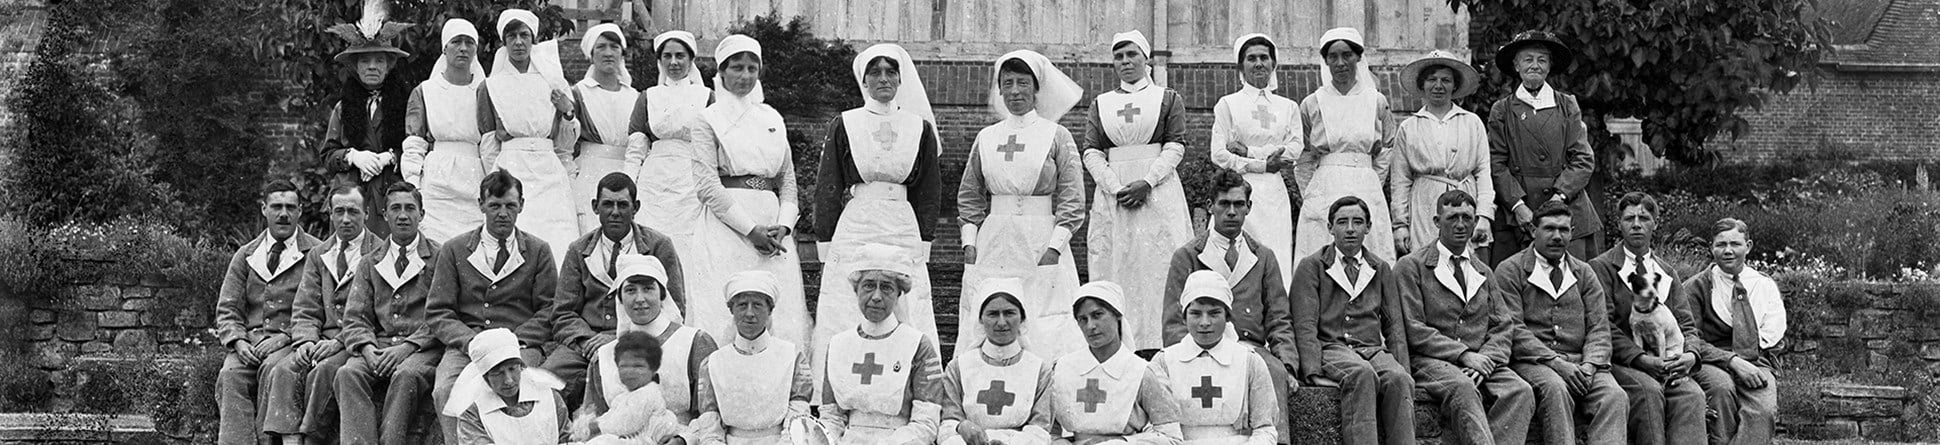 Nurses in long white uniforms with soldiers dressed in regulation convalescent uniforms at Great Dixter, East Sussex. During the war many country houses were used as hospitals and convalescent homes.